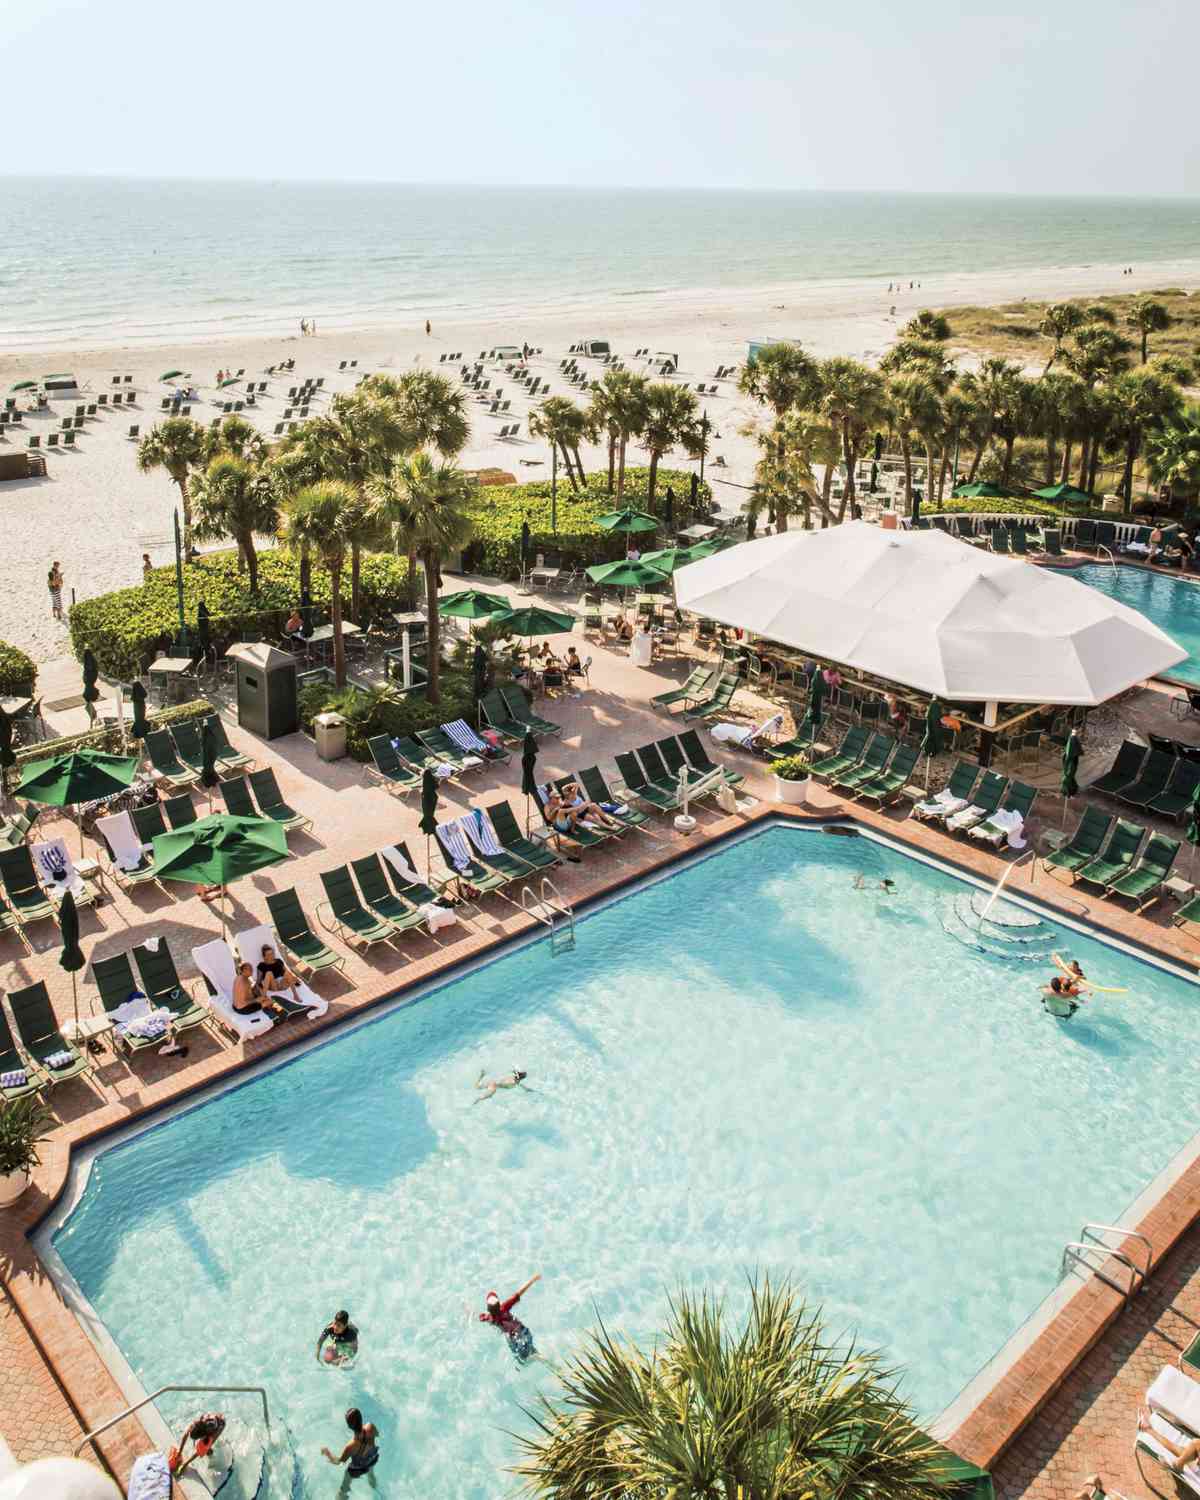 The Don Cesar Hotel Pool in St. Petersburg, FL